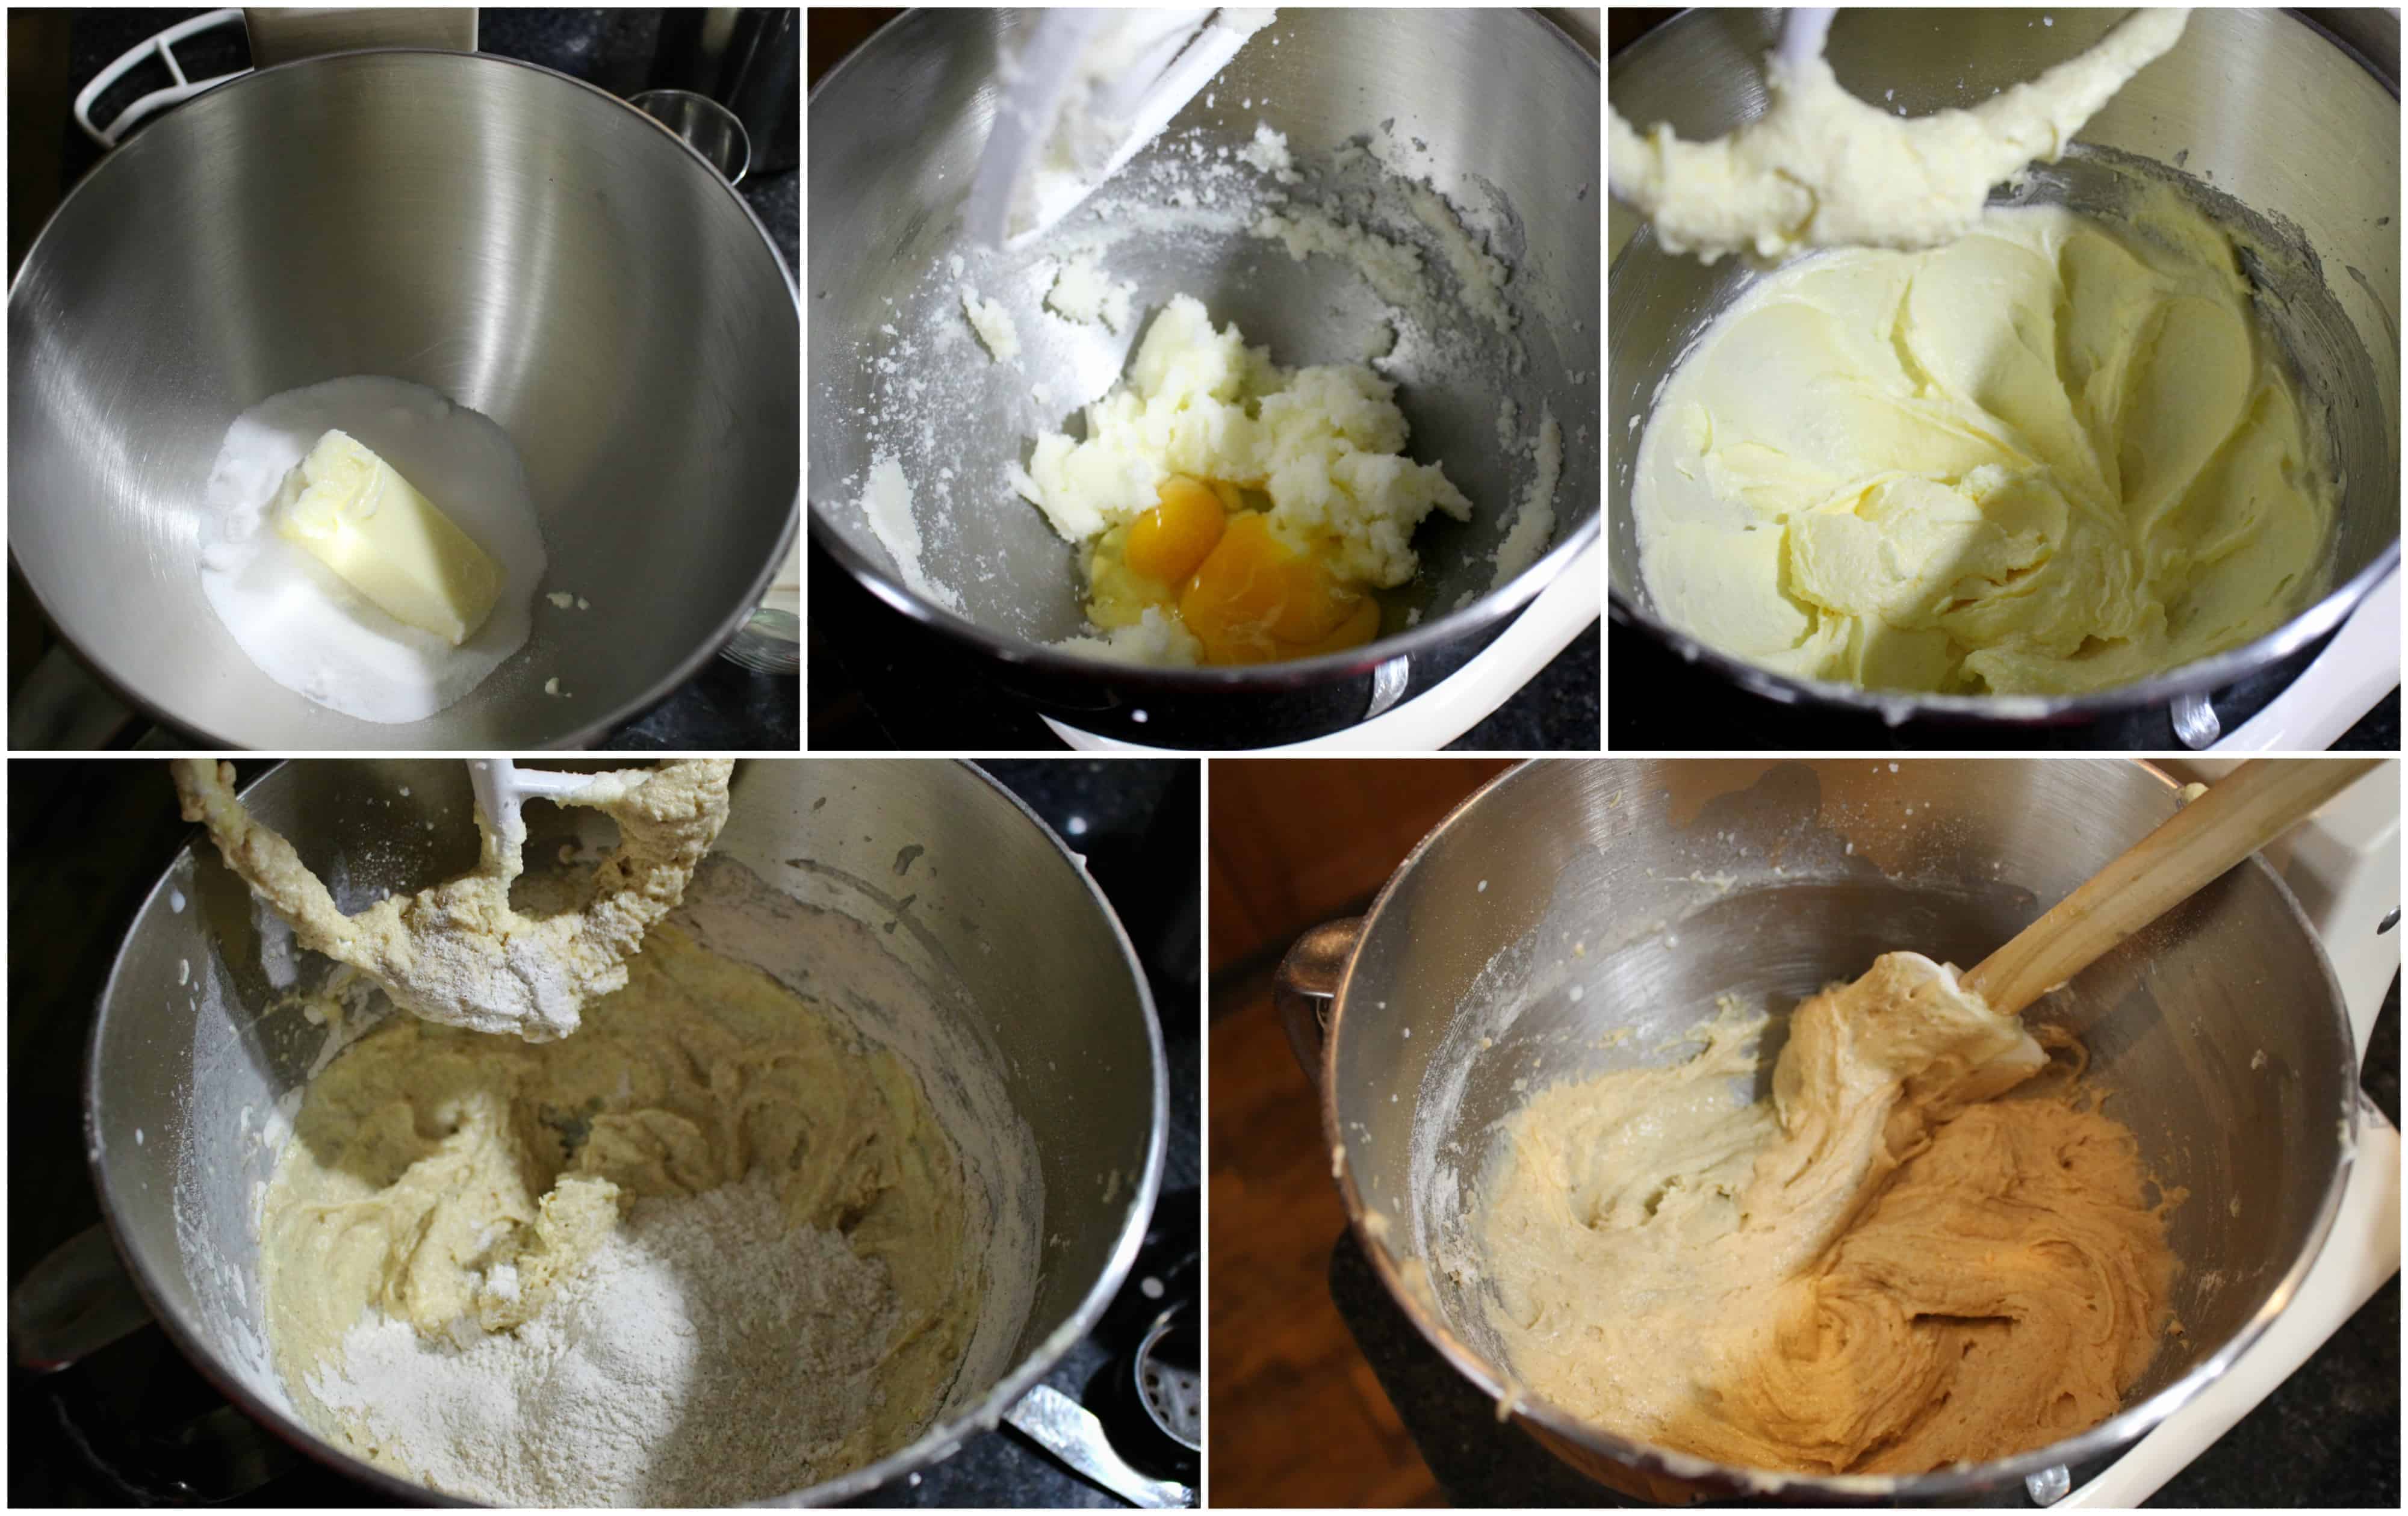 Making the batter in a bowl